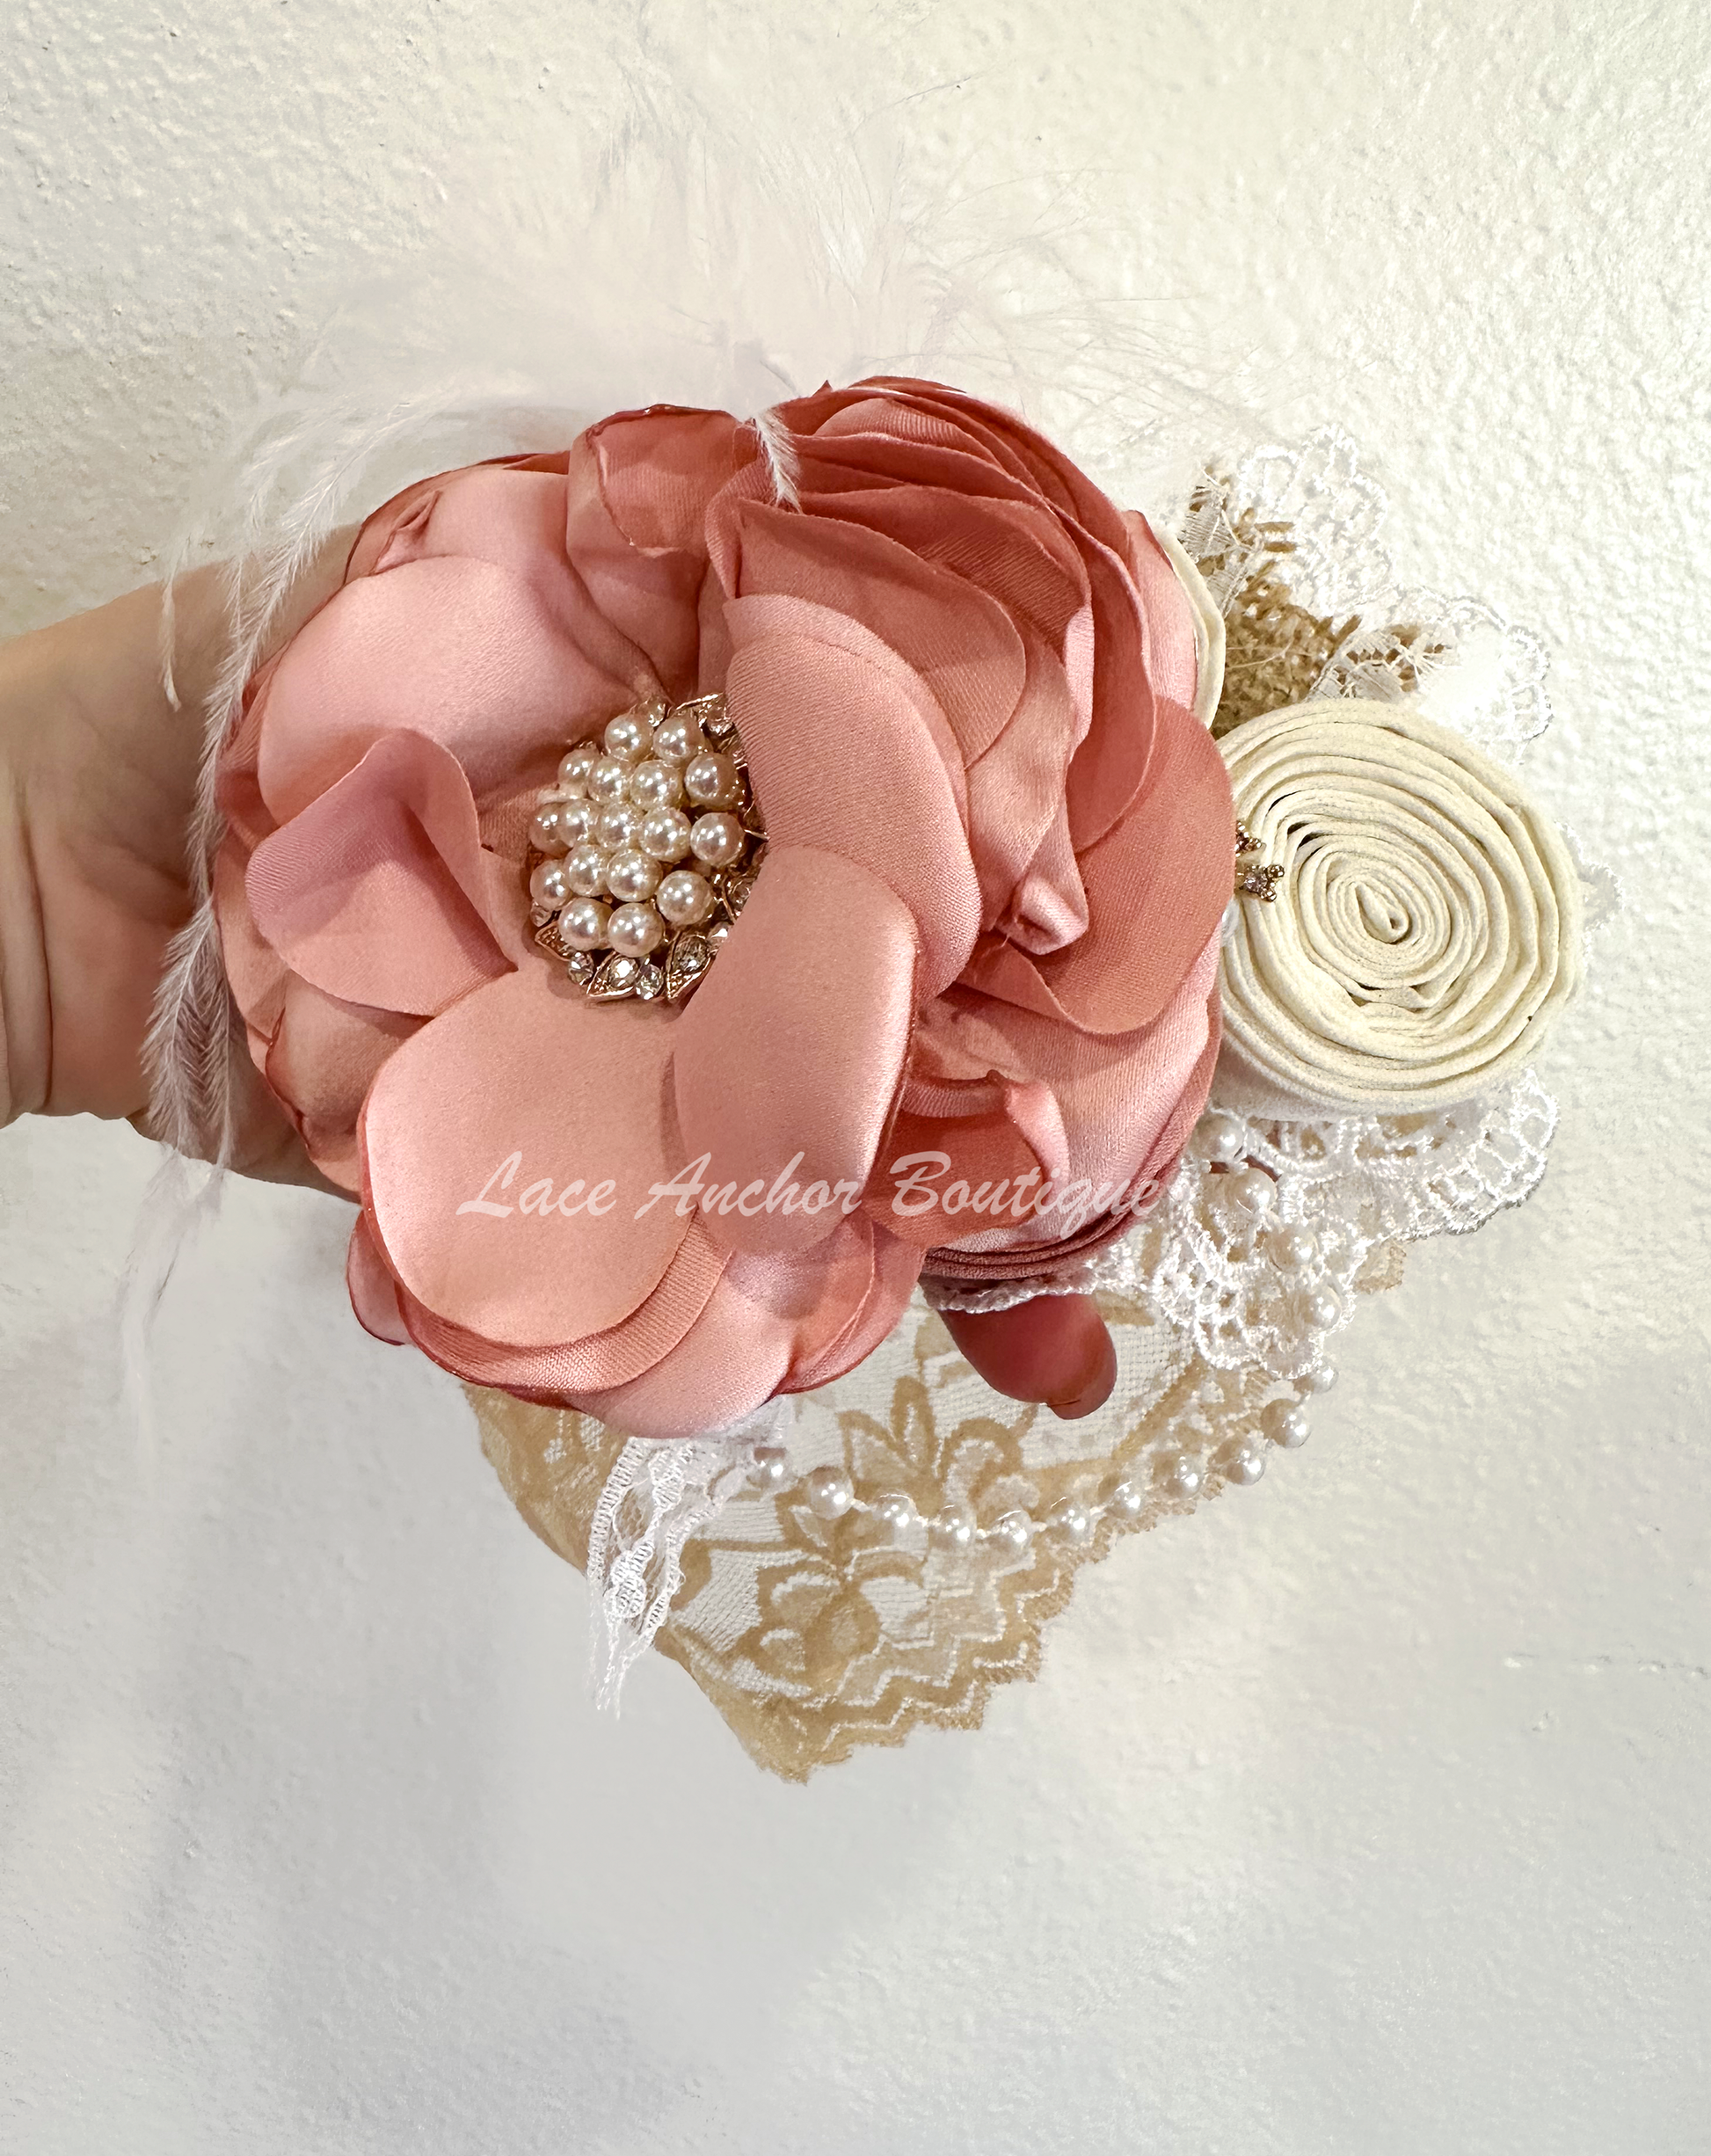 floral rhinestone, pearl, burlap, feather, and lace baby girls headband wrap. Flower girl elegant toddler hair bow in light blush pink.